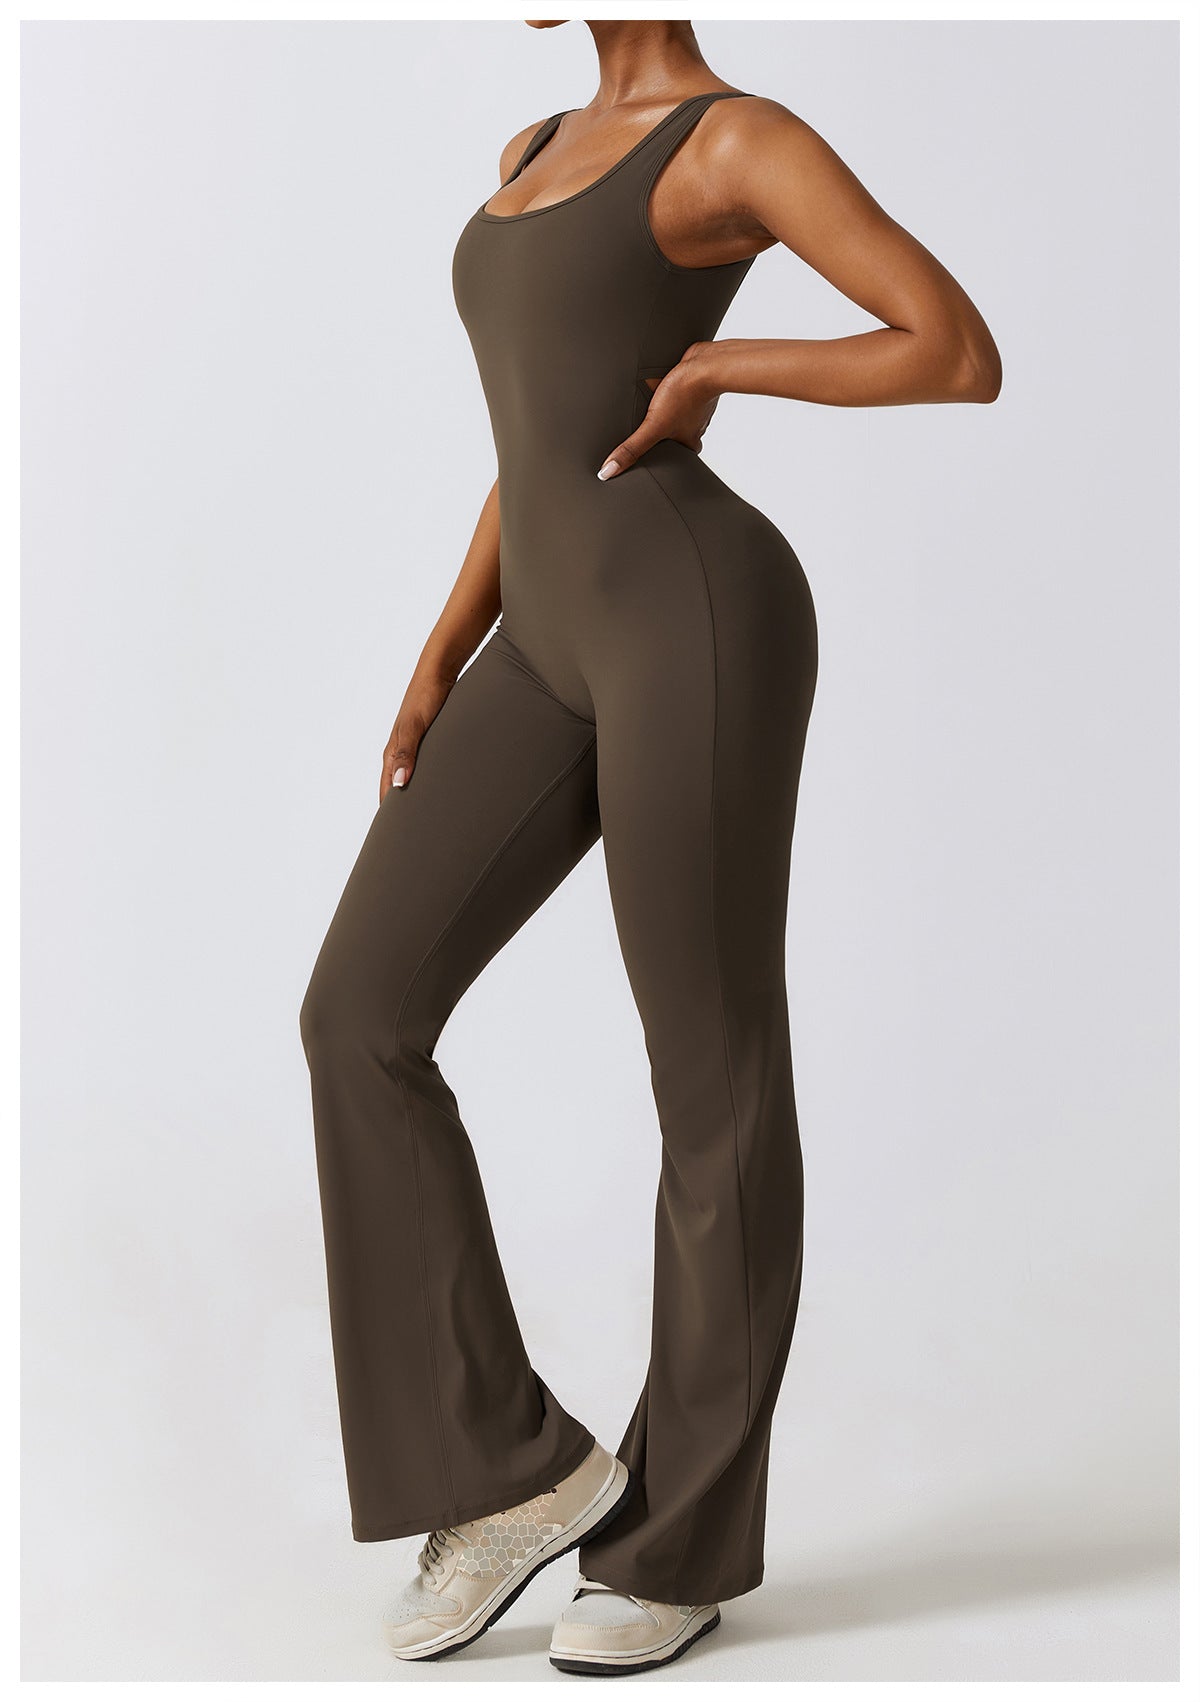 FAY - FLARE JUMPSUIT - VIRAL